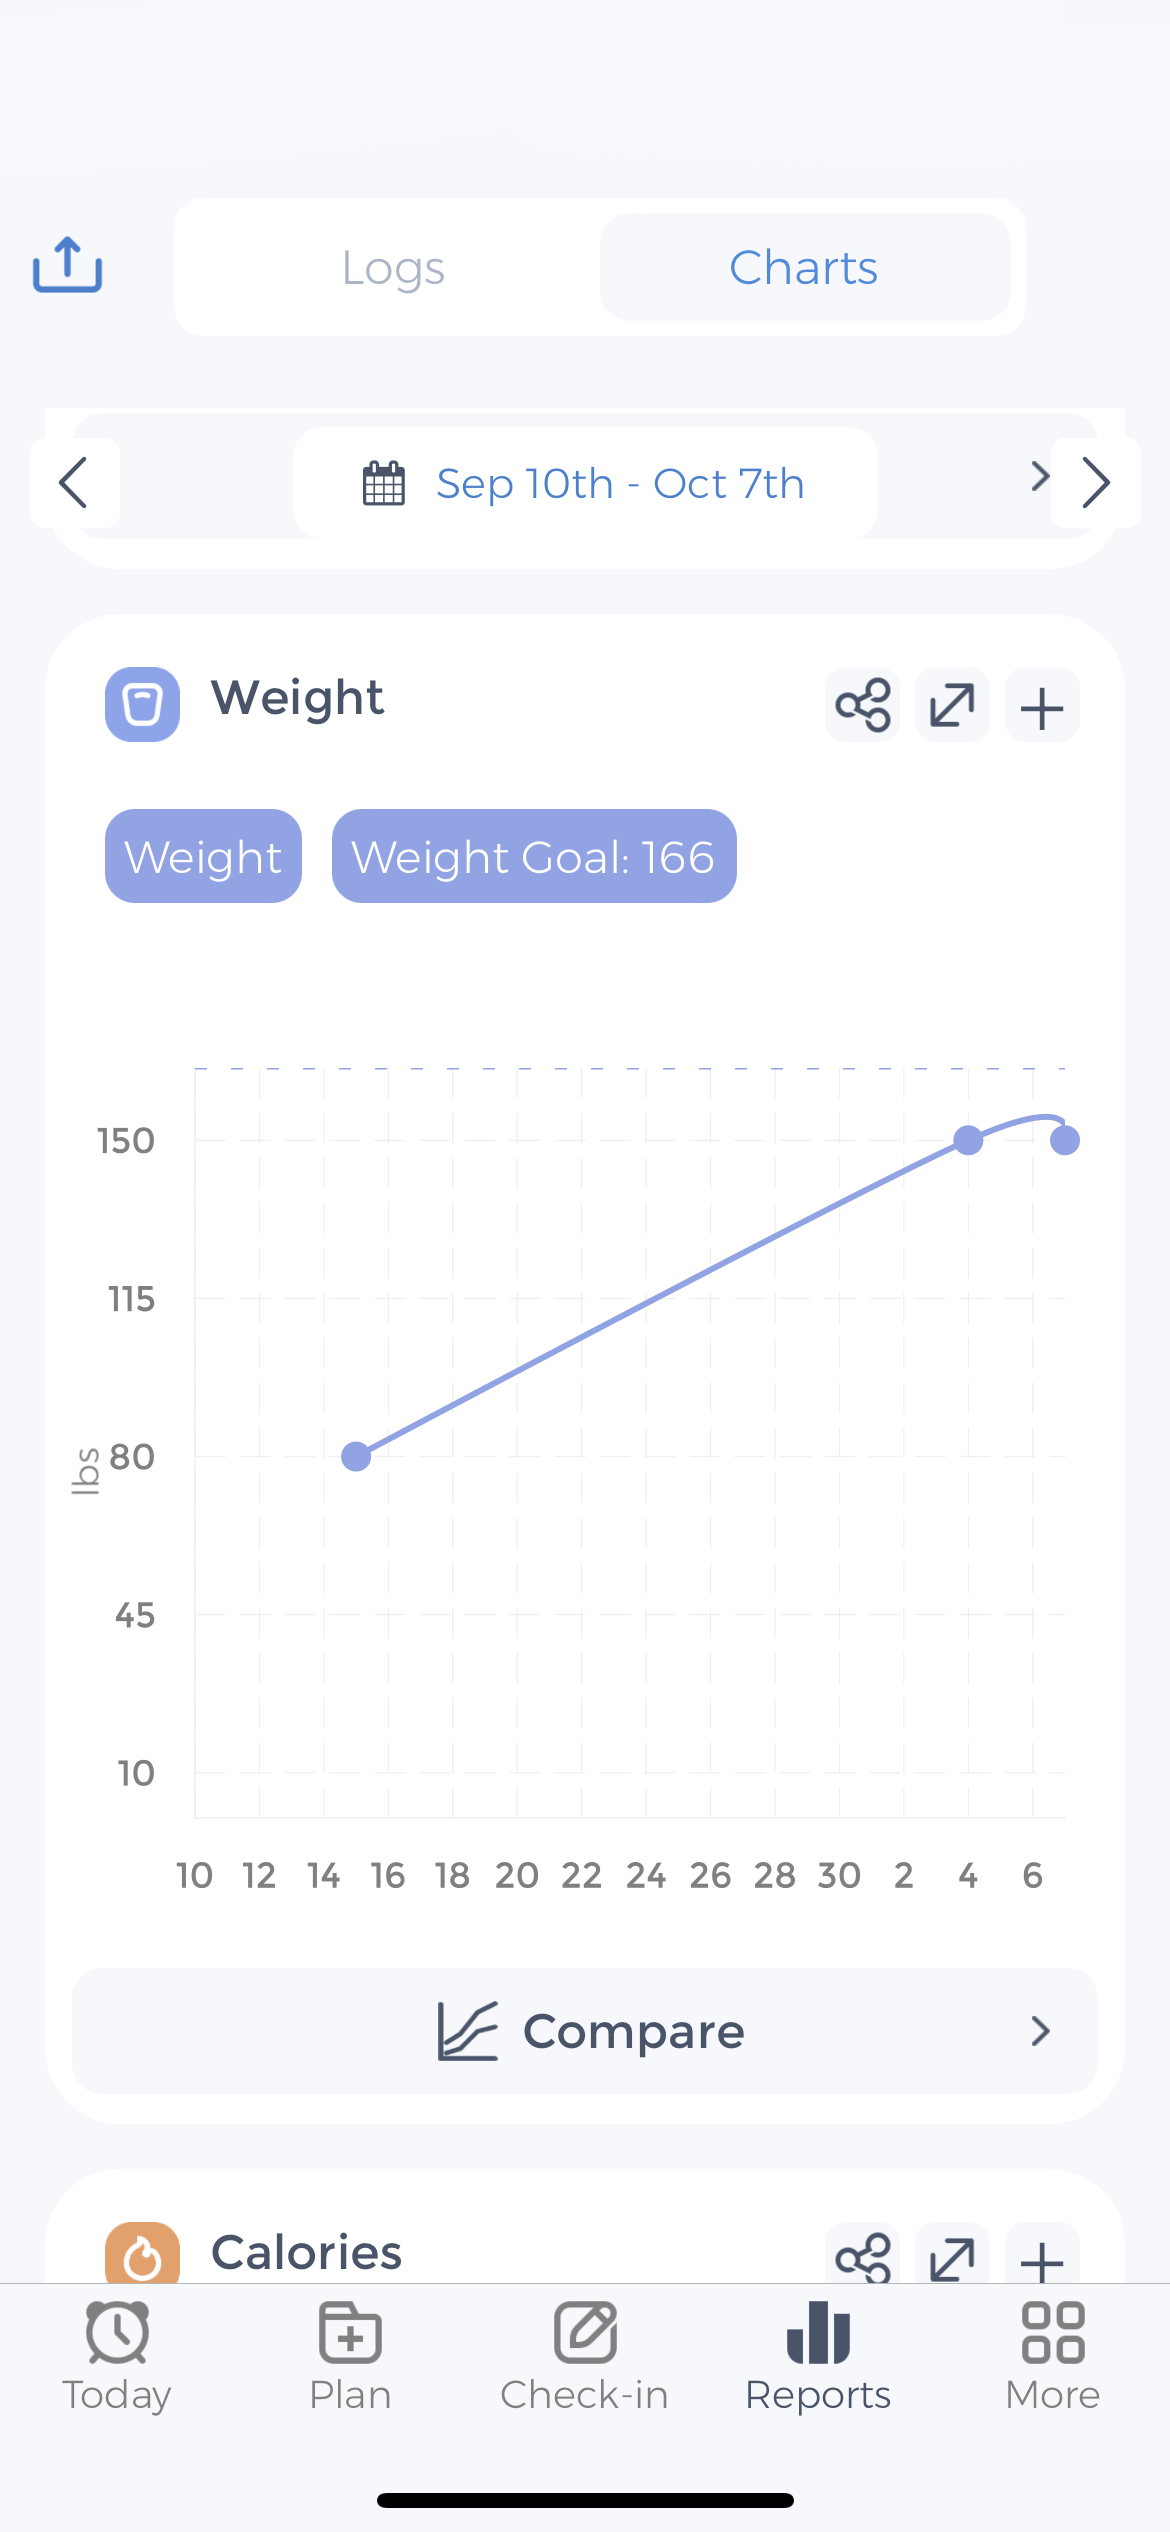 weight loss measurements tracker template